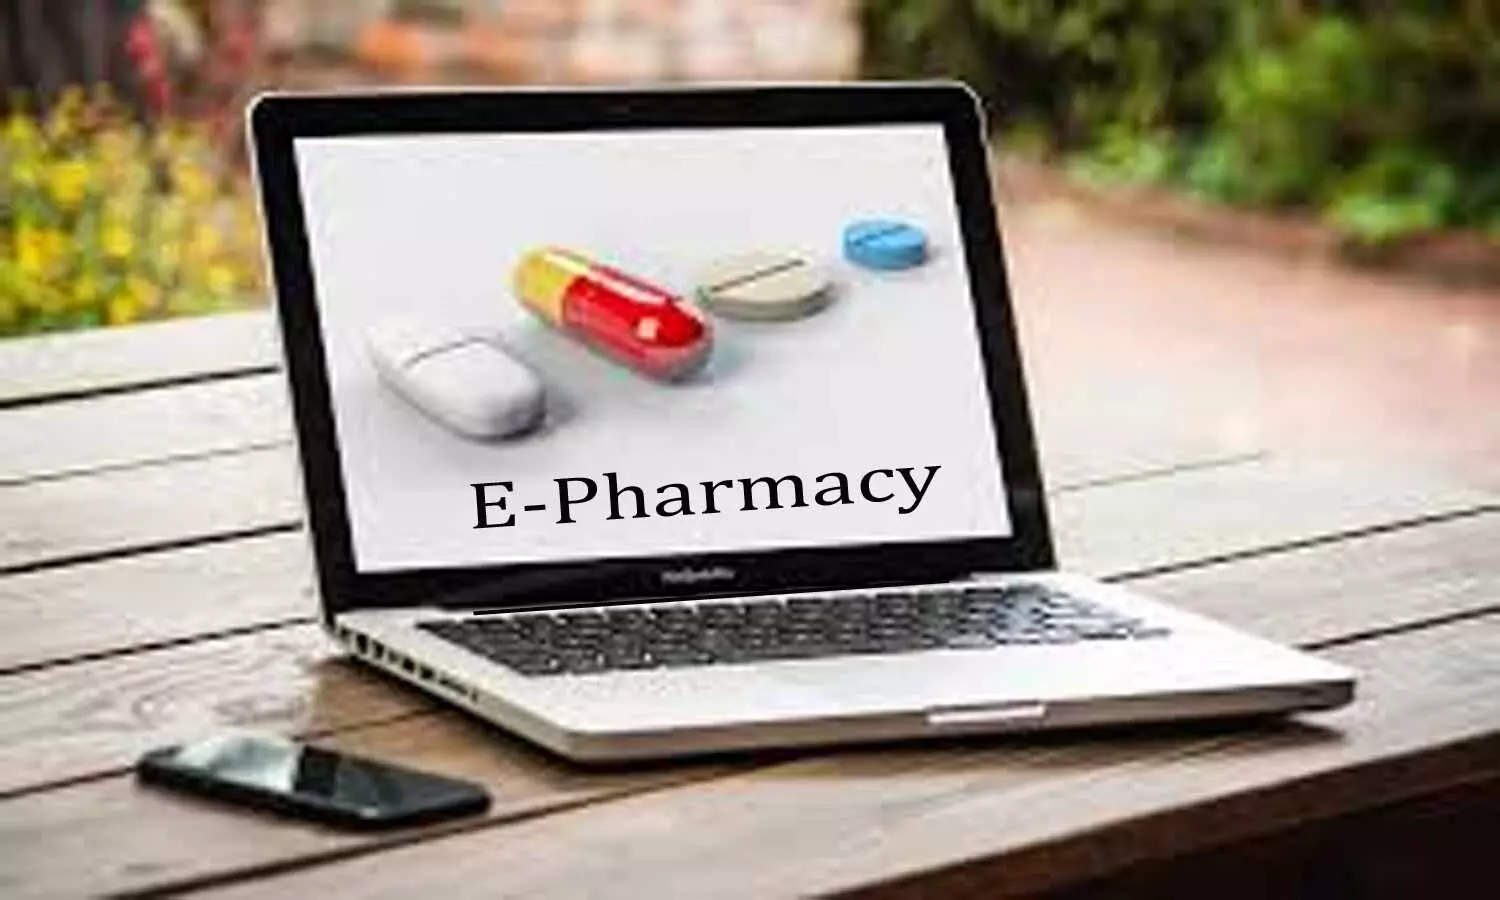 Take action against e-pharmacy firms: Domestic traders body CAIT to Govt